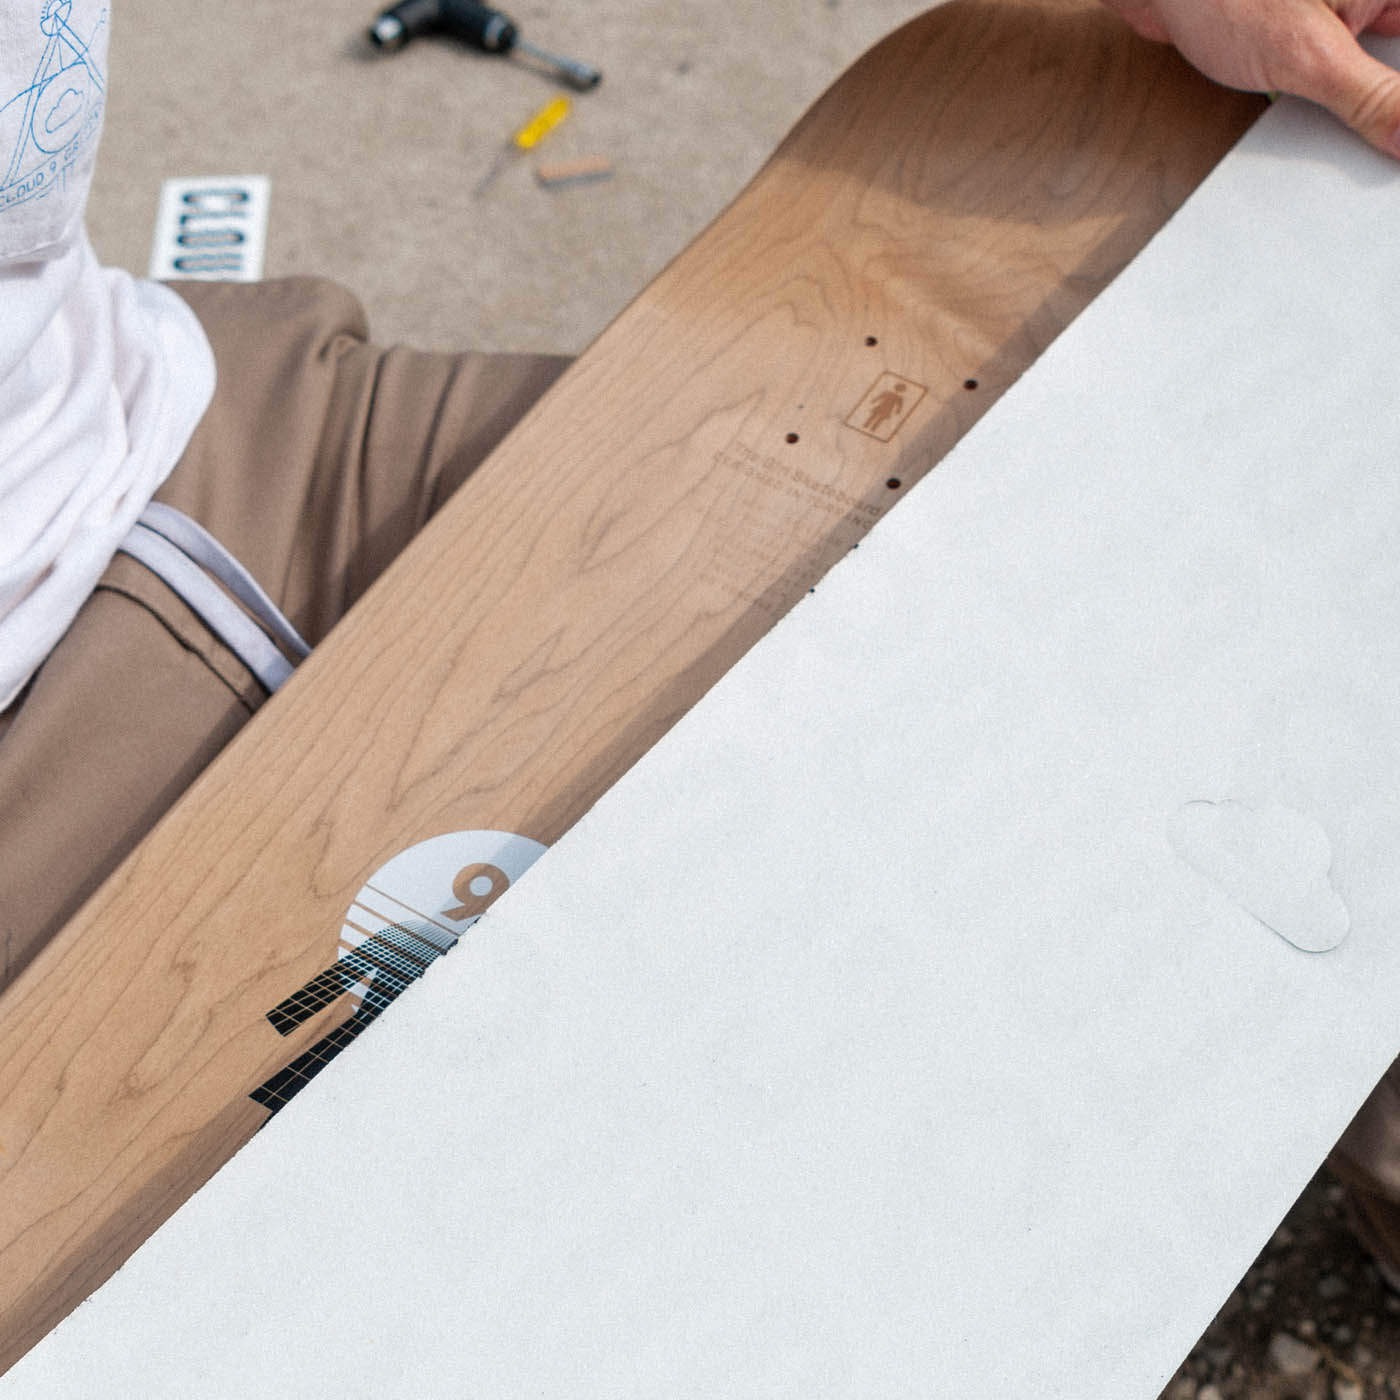 Prepping your skateboard deck before installing clear grip tape.